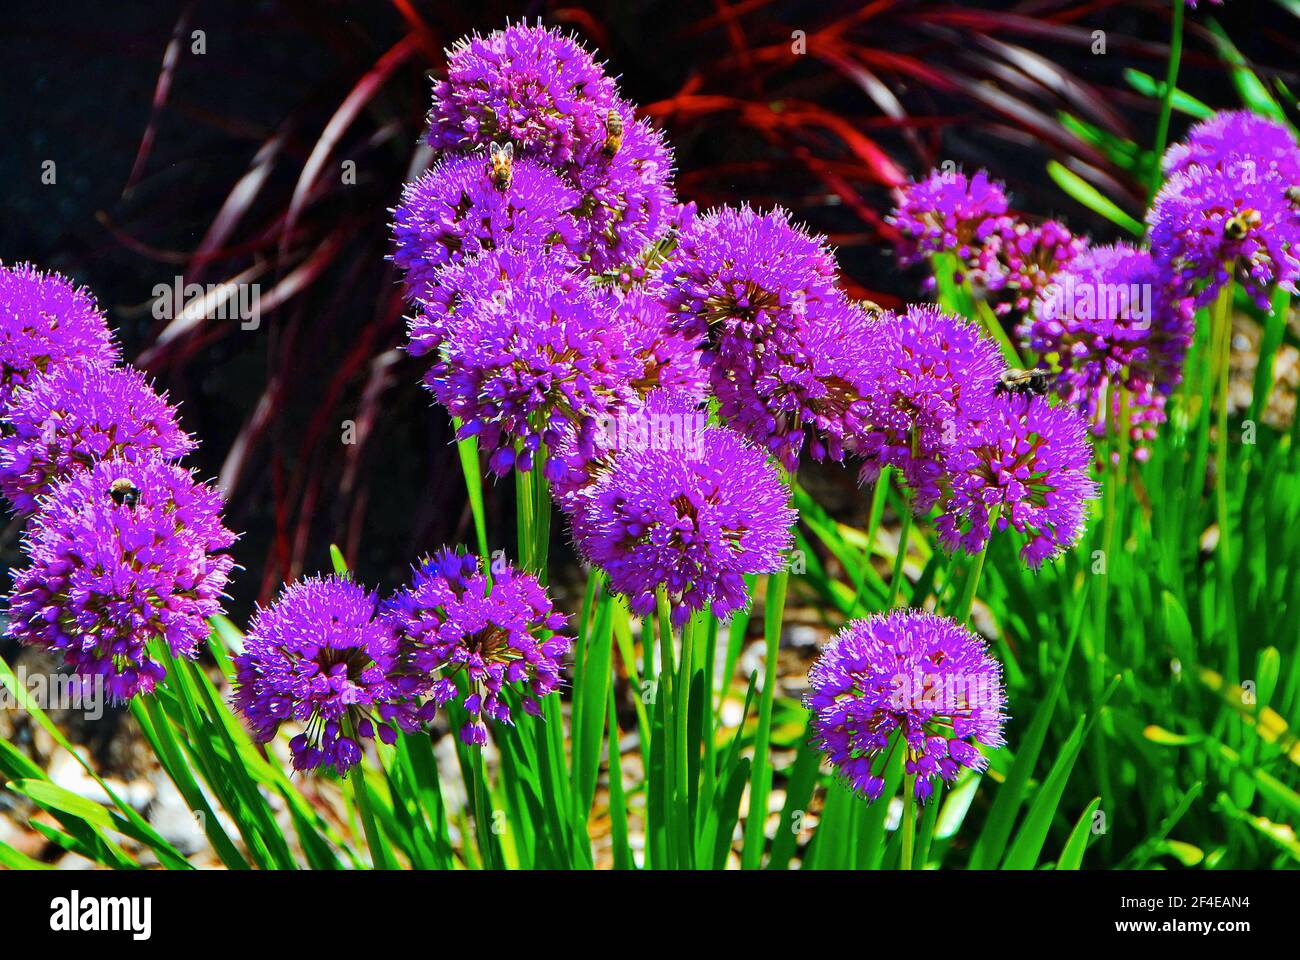 A group of vibrant, purple allium blooming in spring. Stock Photo